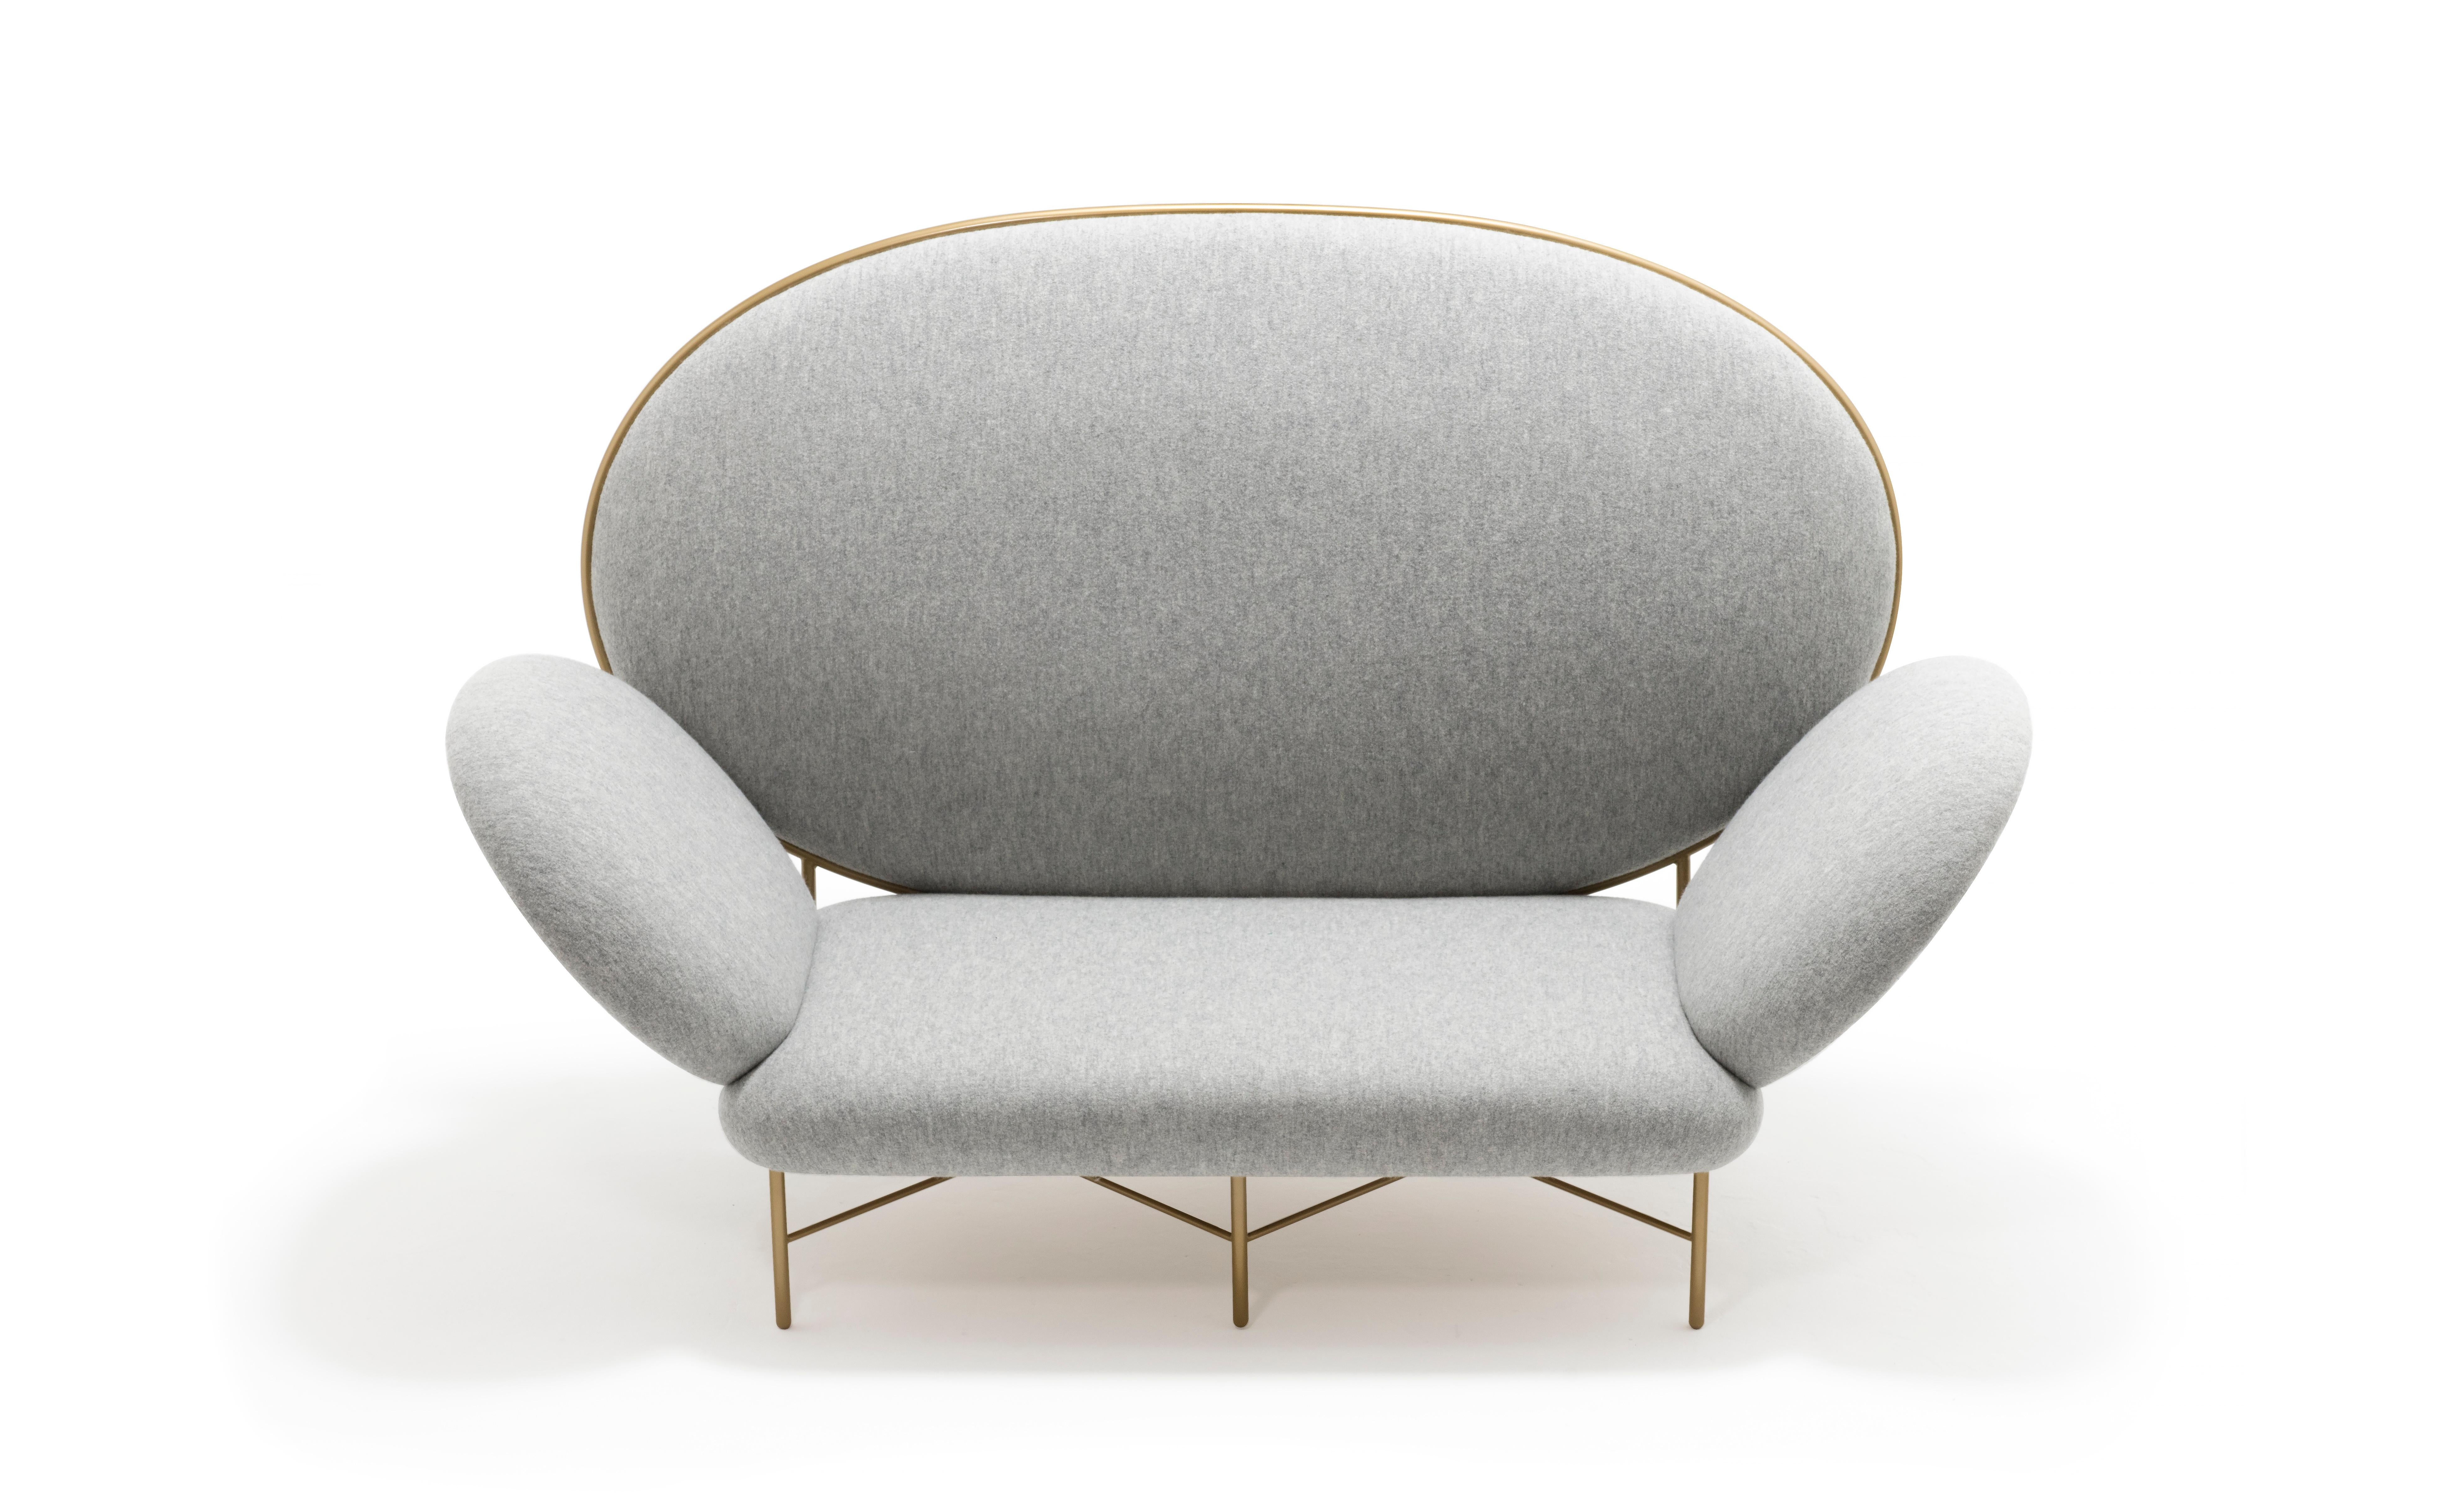 Contemporary ivory upholstered grey sofa - Stay Sofa by Nika Zupanc for Se.

Design: Nika Zupanc
Frame upholstered in Holland & Sherry Chamonix (Color Smoke) fabric. Available also in a choice of leathers or fabrics, or in customer’s own material